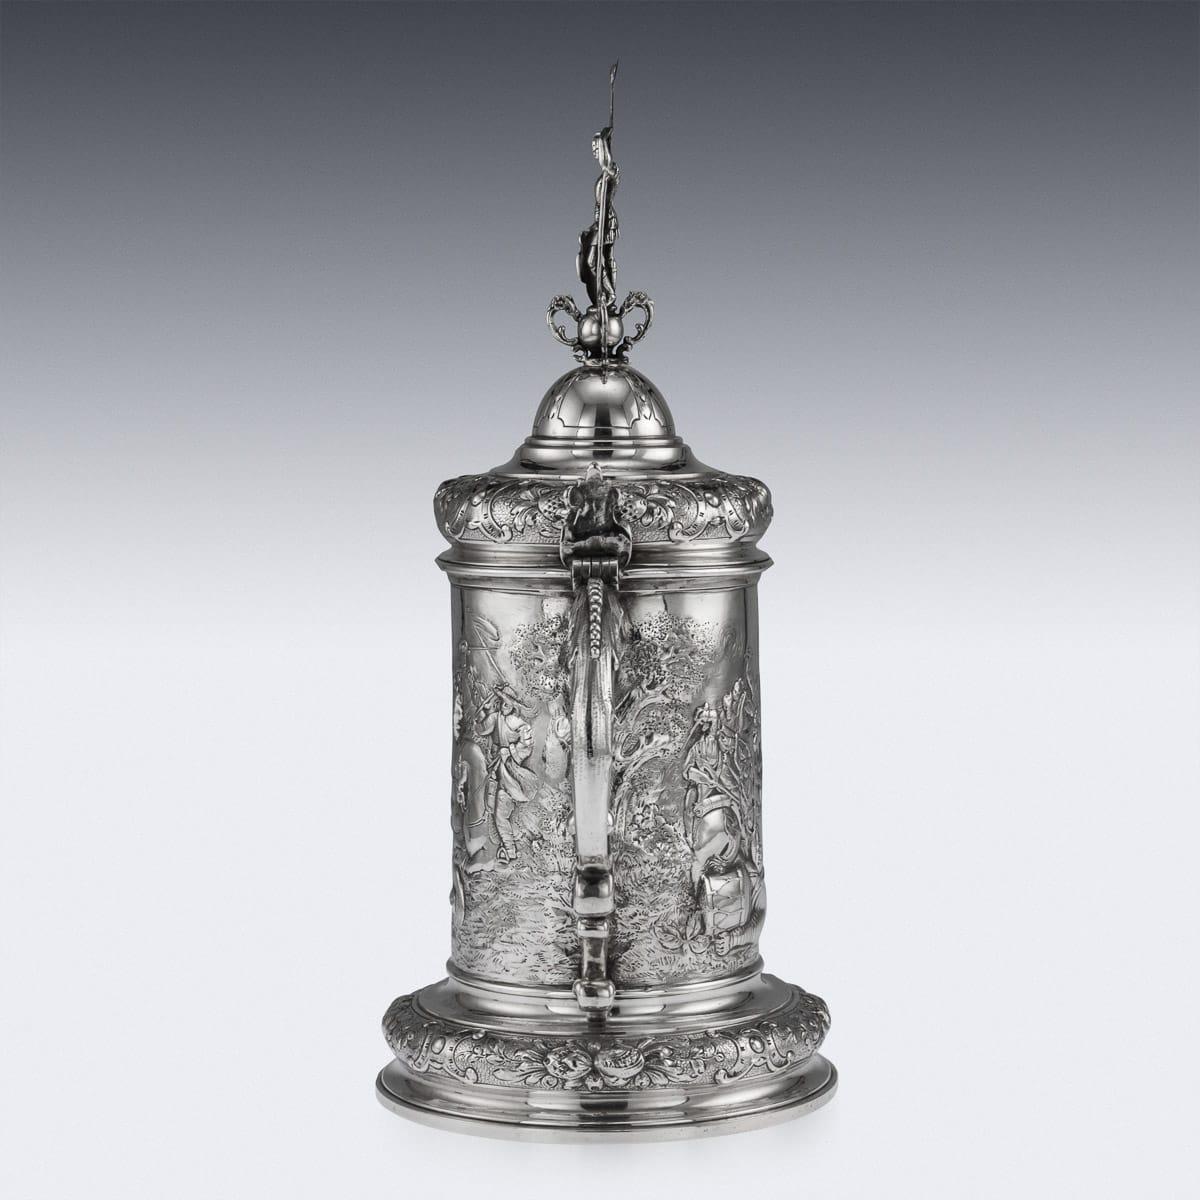 Antique late 19th century German (Hanau) solid silver large lidded tankard, in the style of the early 16th century example, beautifully chased and embossed with a very detailed and crowded battle scenes, the base decorated with scrolling foliage and